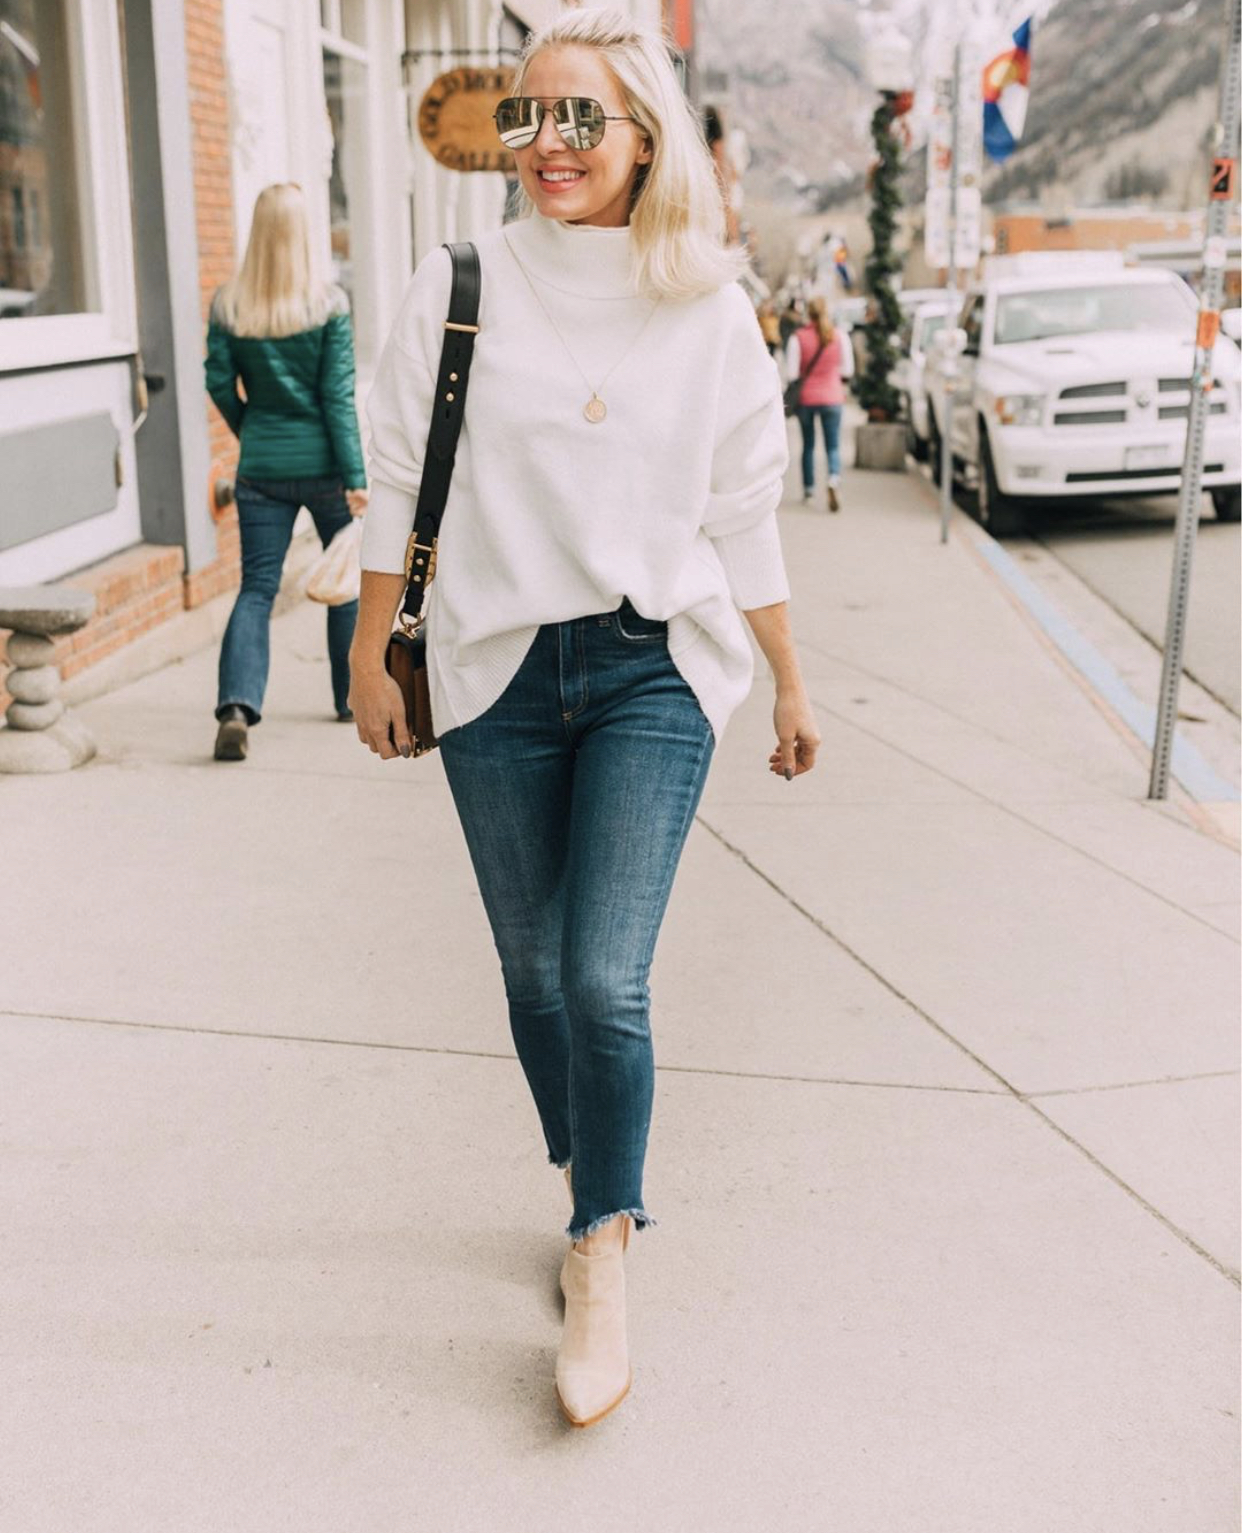 Women's fashion blogger, Erin Busbee, shares 5 fashion tips for women over 40 and wears a half tuck shirt